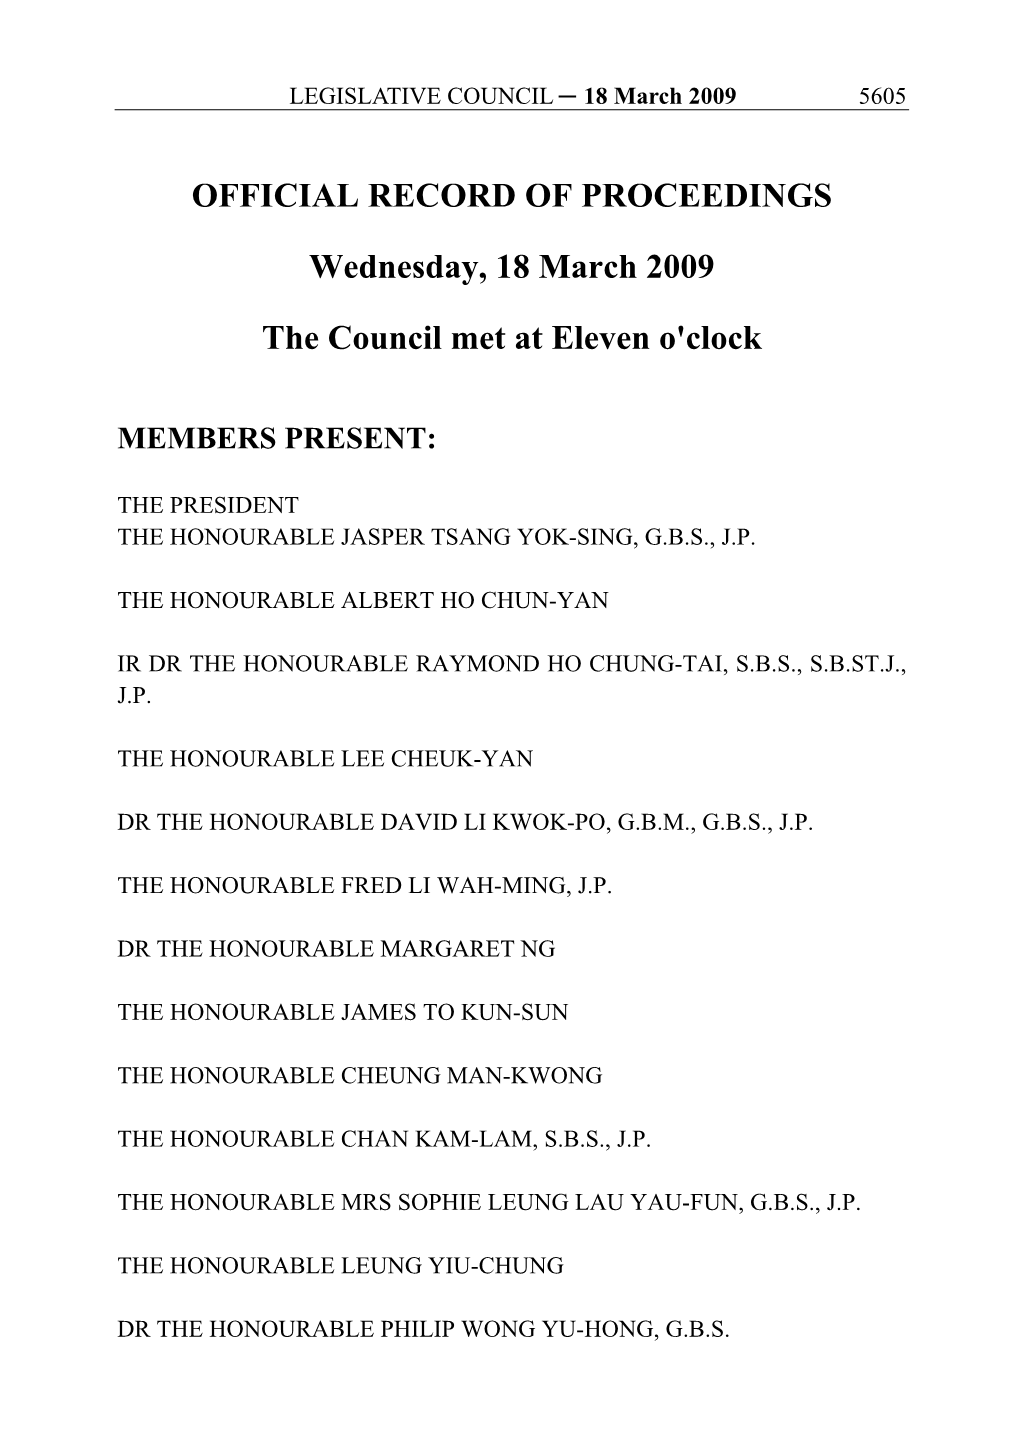 OFFICIAL RECORD of PROCEEDINGS Wednesday, 18 March 2009 the Council Met at Eleven O'clock